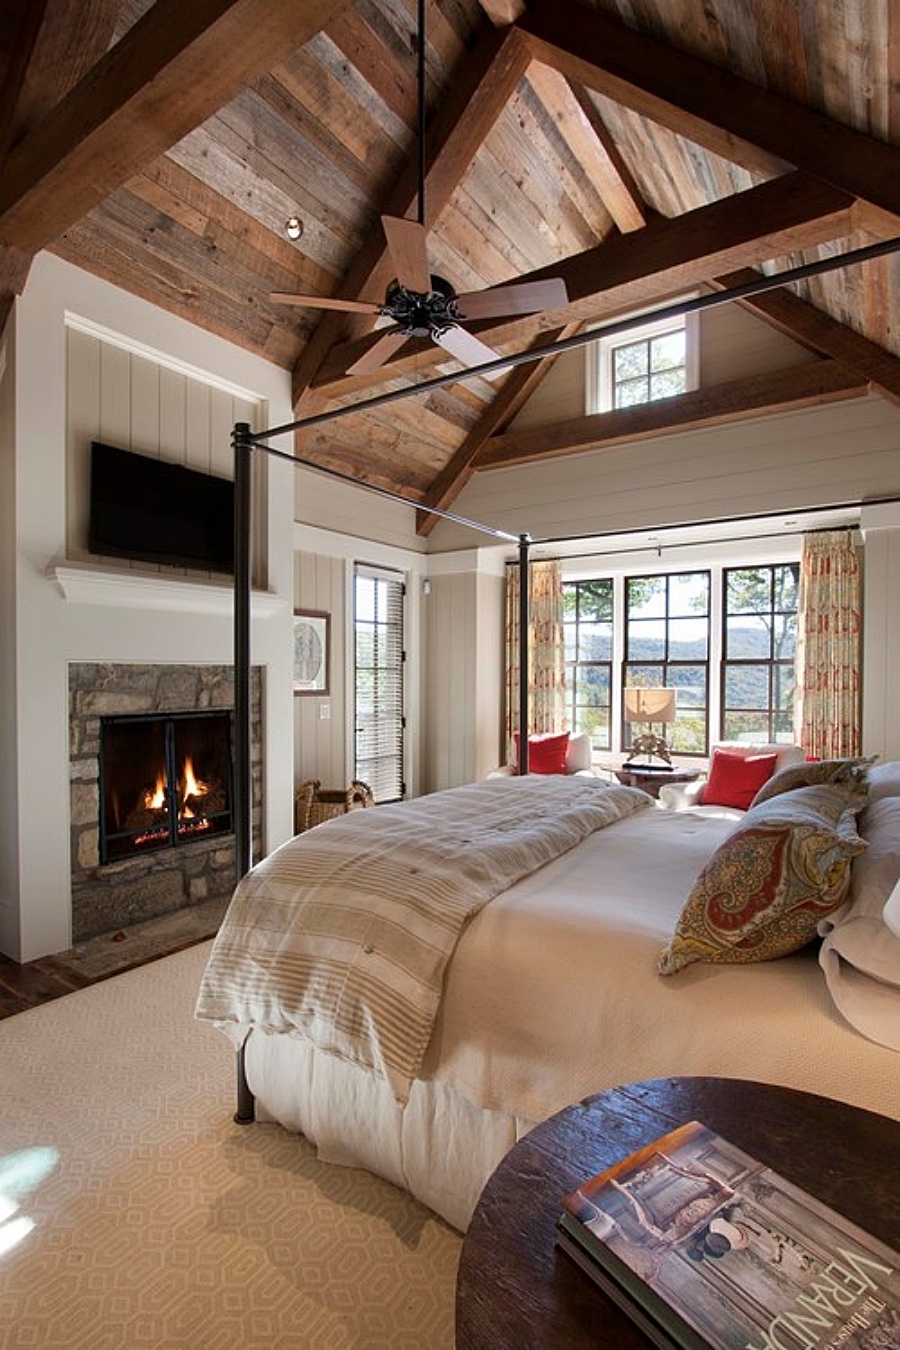 Bedroom fireplace with mountain views